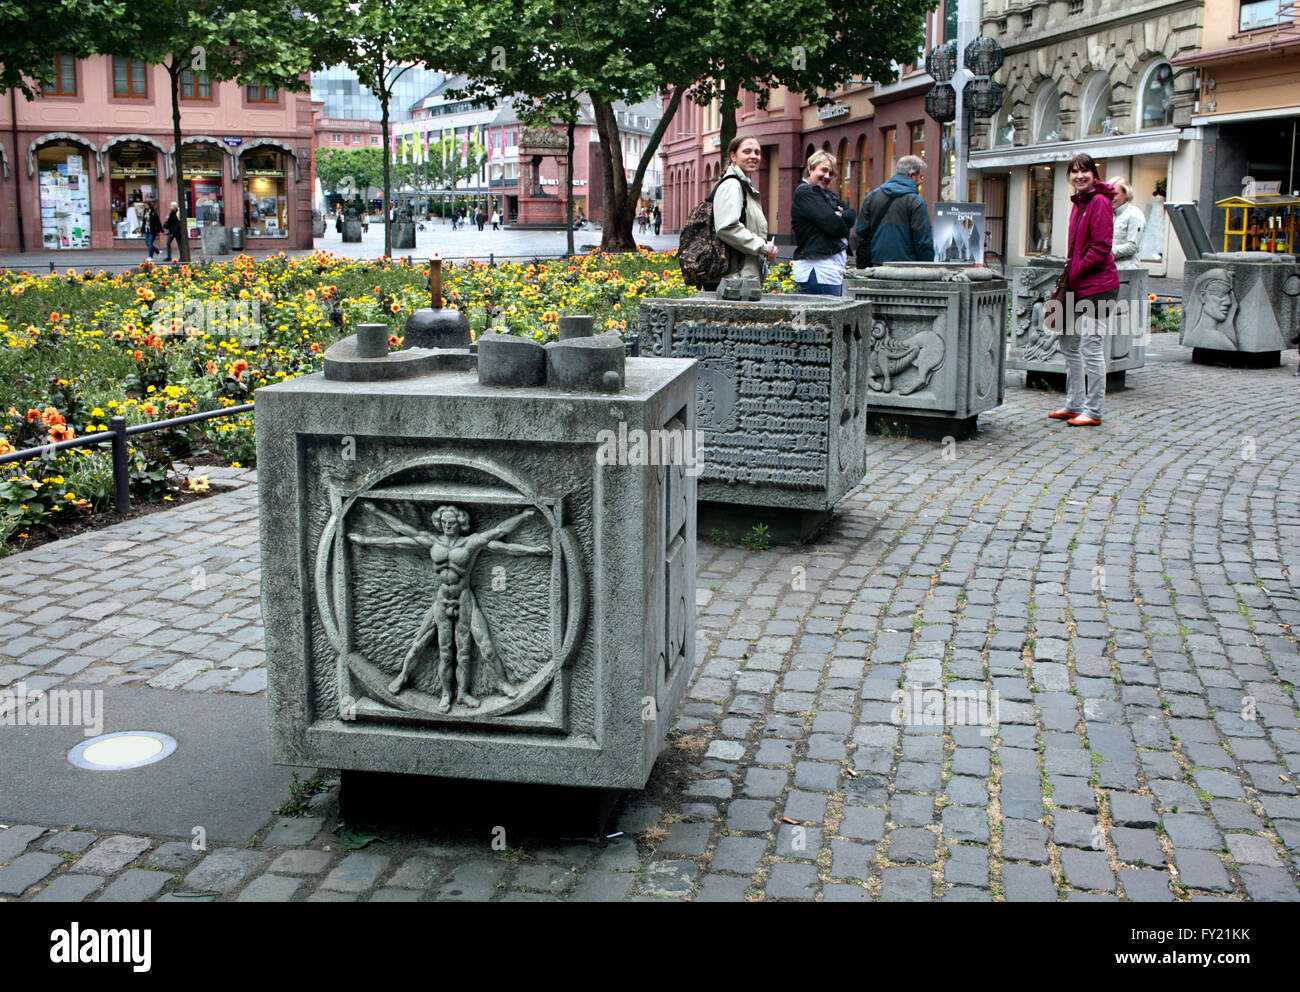 Stone sculptures of printers’ blocks, part of a monument to printers' type, outside the Gutenberg Museum, Mainz, Germany. Stock Photo